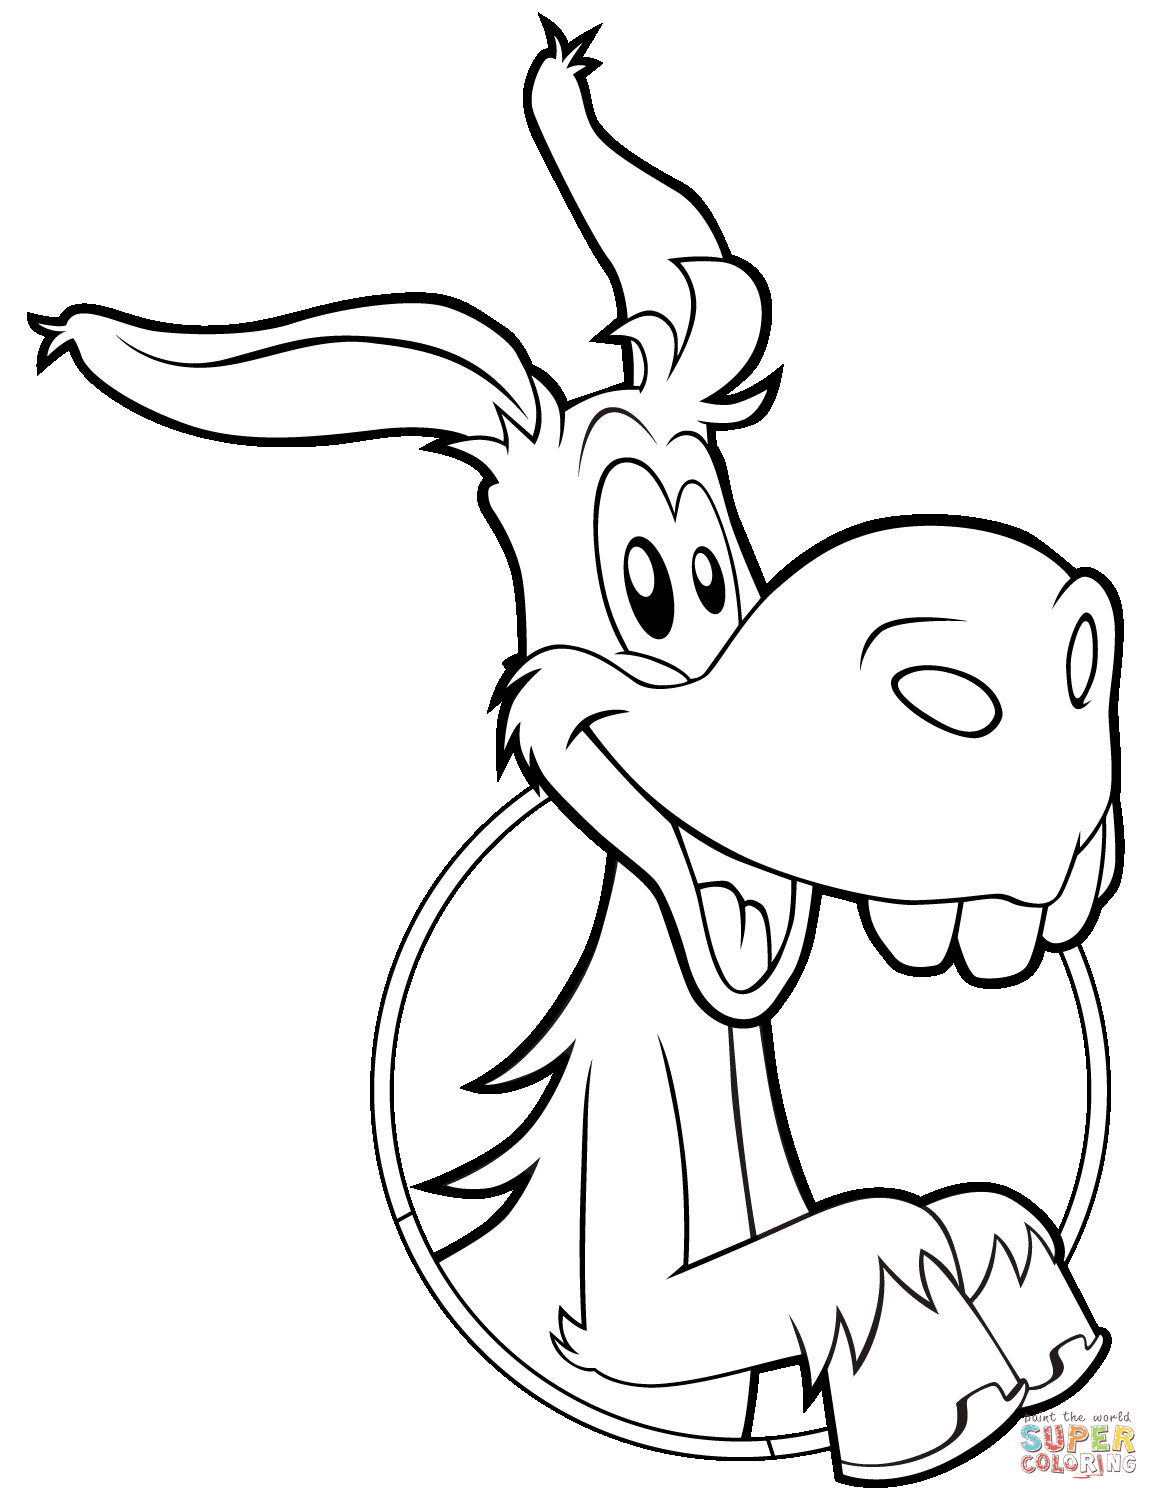 Donkey Coloring Page Cute Cartoon Donkey Coloring Page Free Printable Coloring Pages